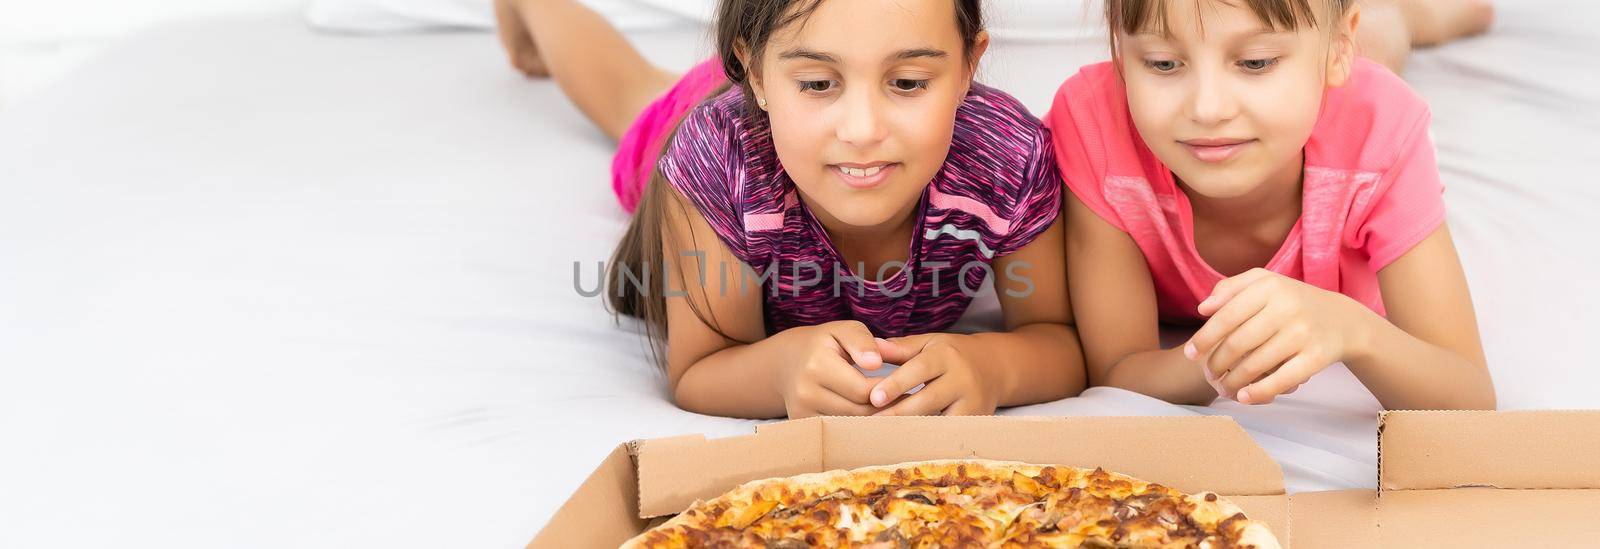 Two little girls eating pizza at home.